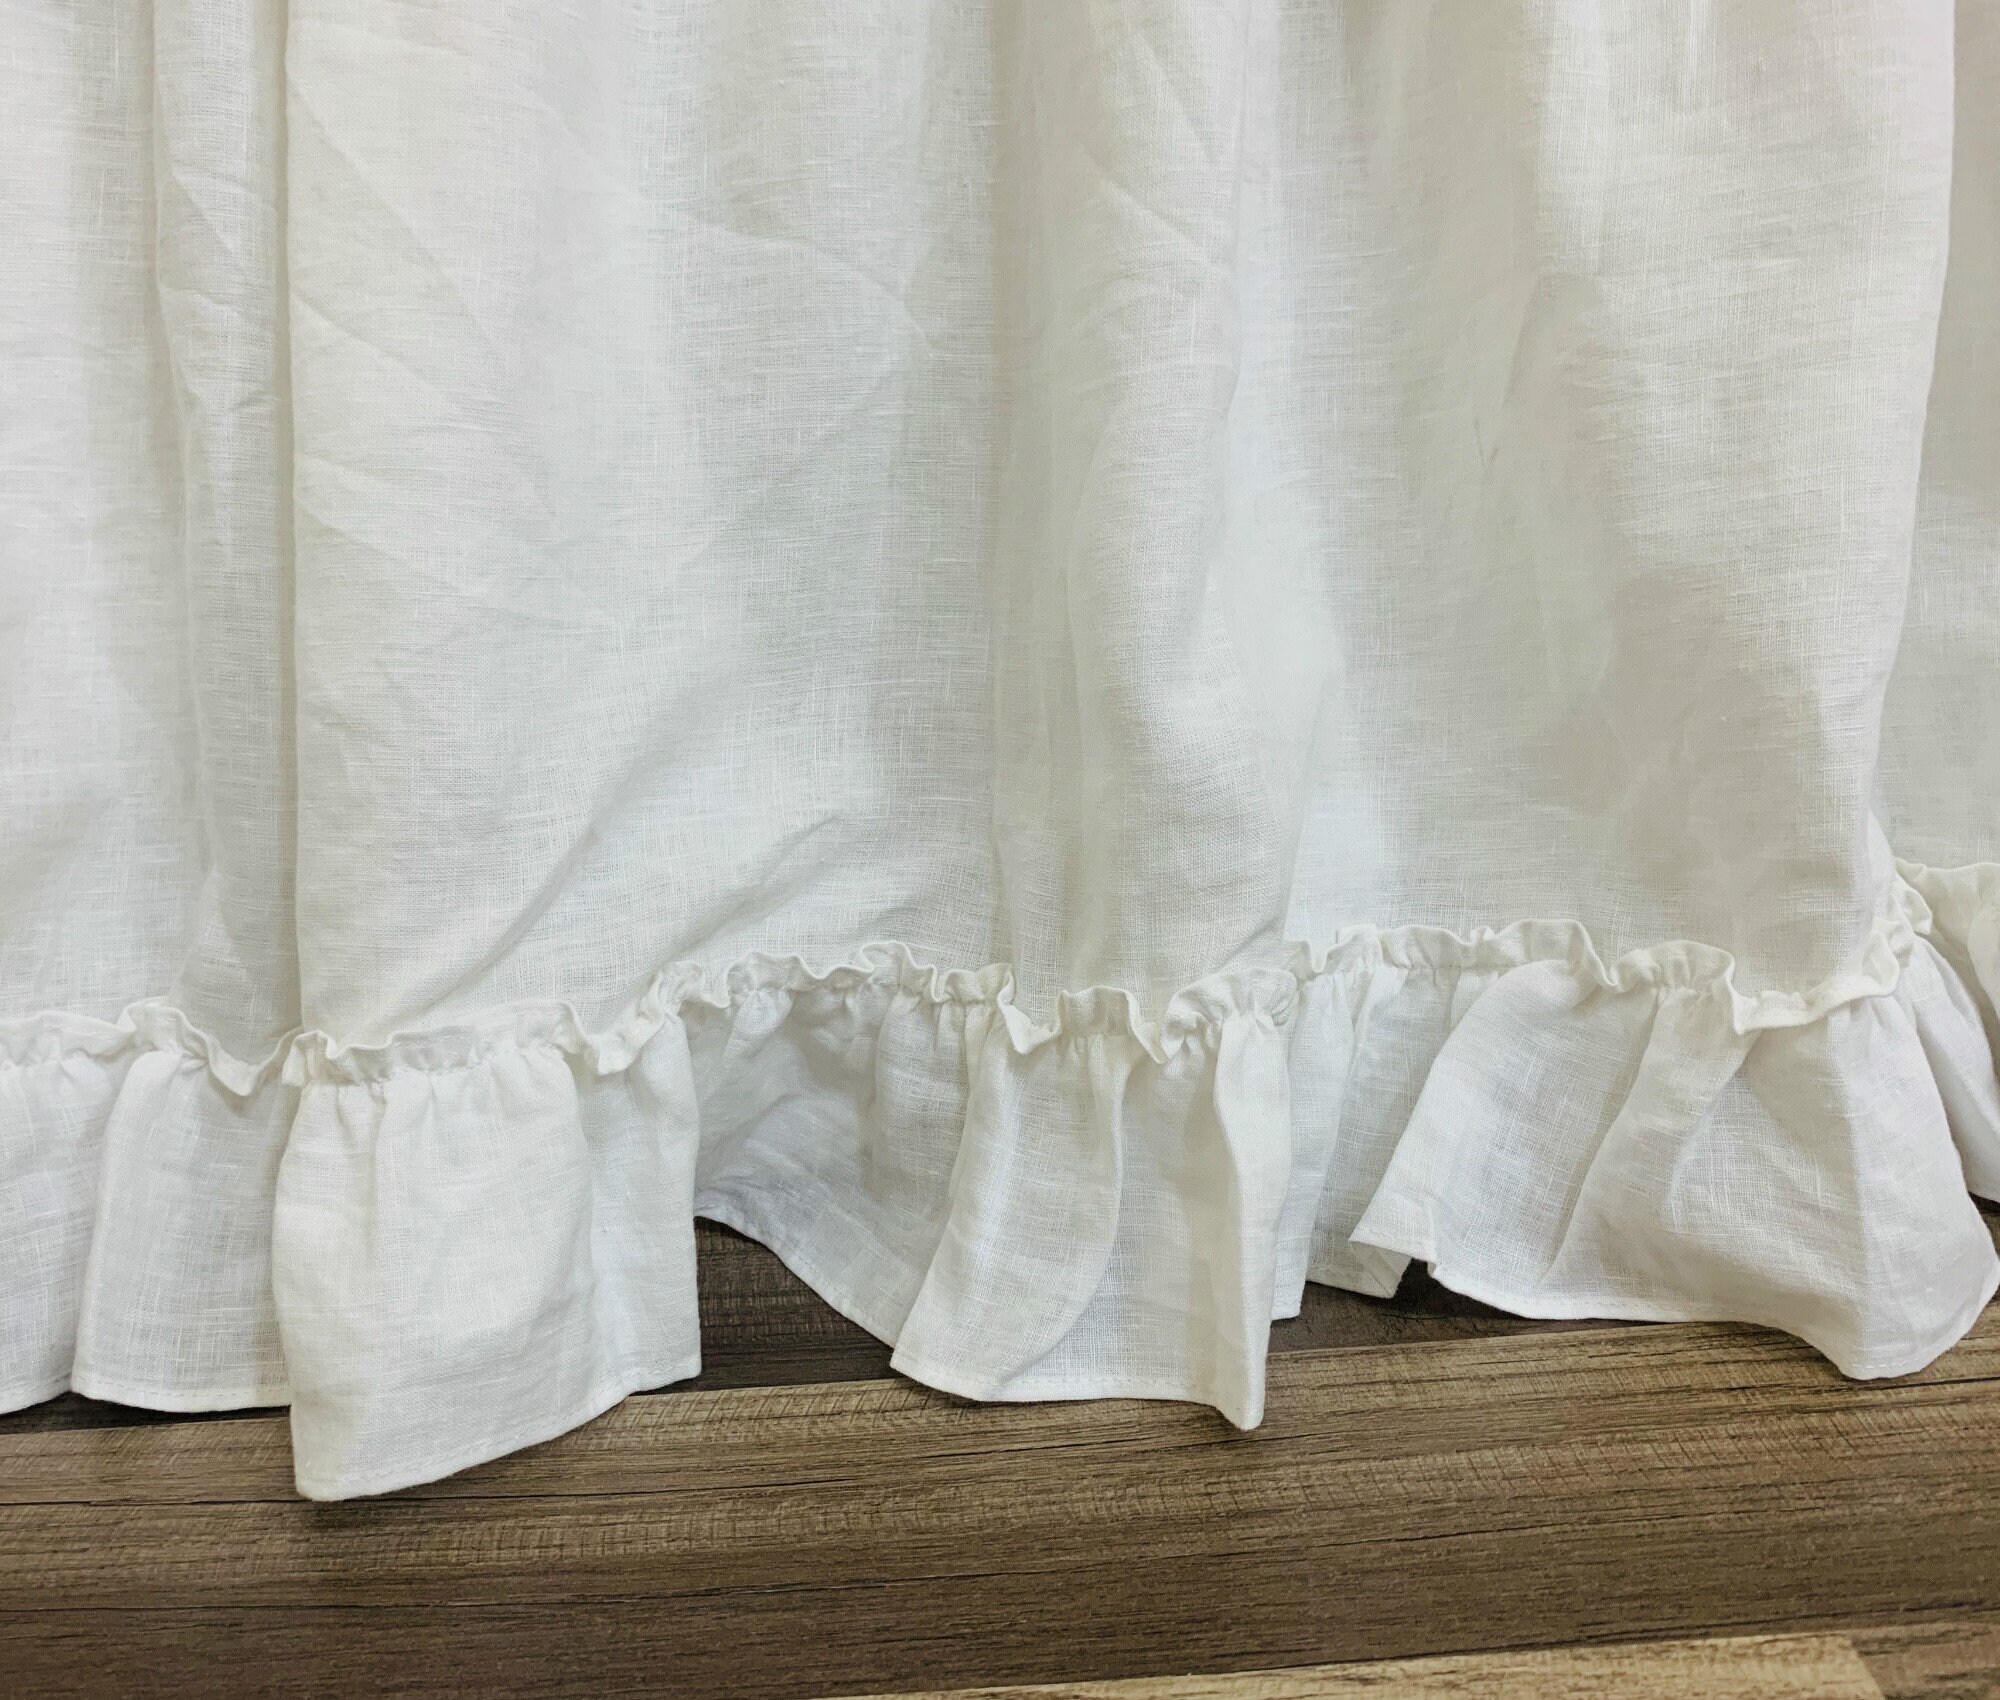 Natural linen bedskirt with country ruffle hem bed ruffles | Etsy